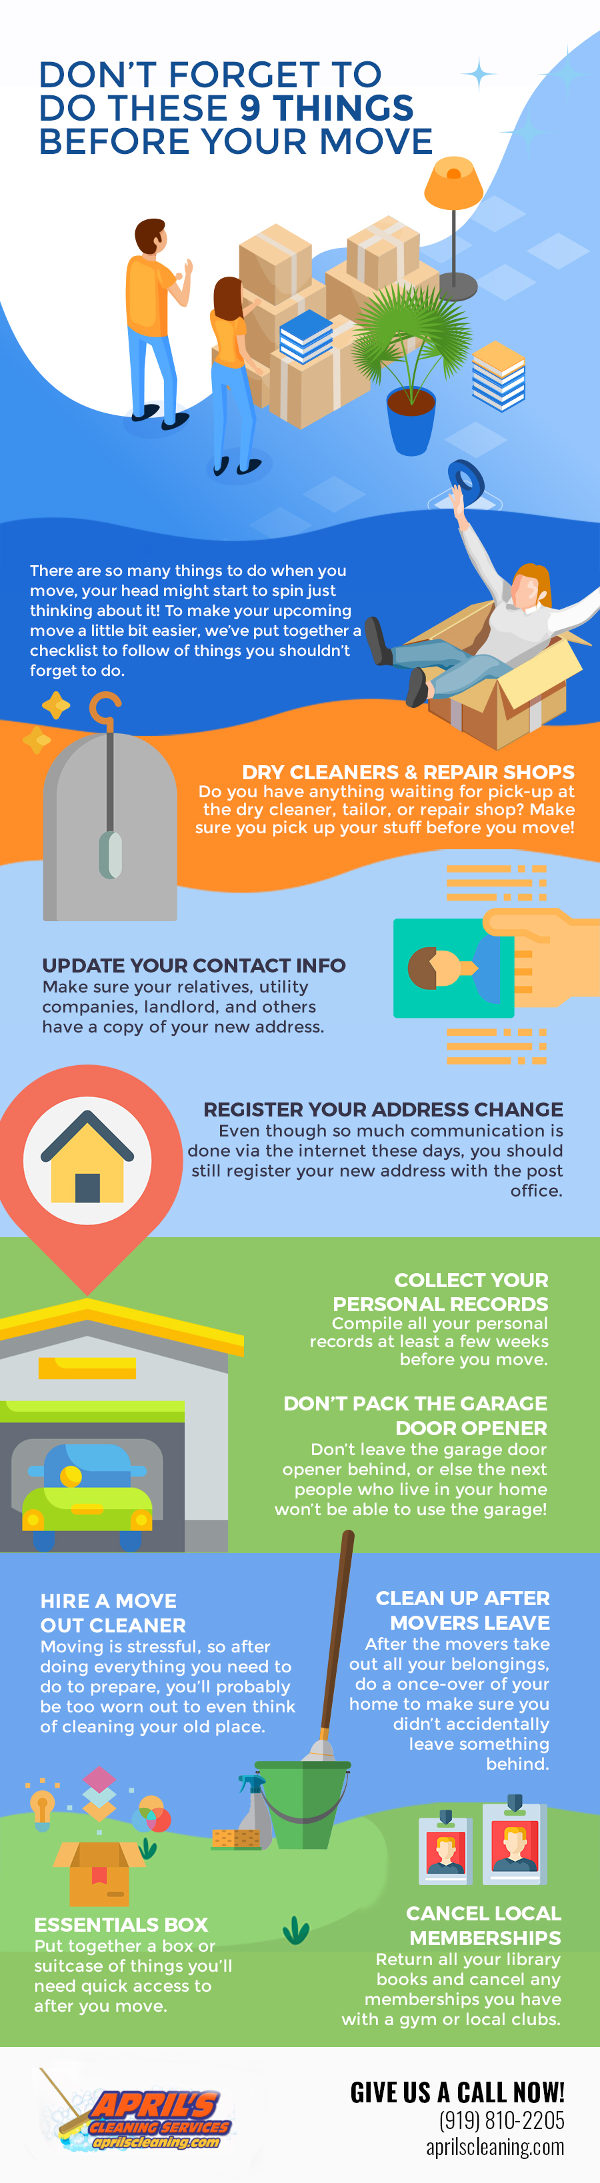 Don’t Forget to Do These 9 Things Before Your Move [infographic]